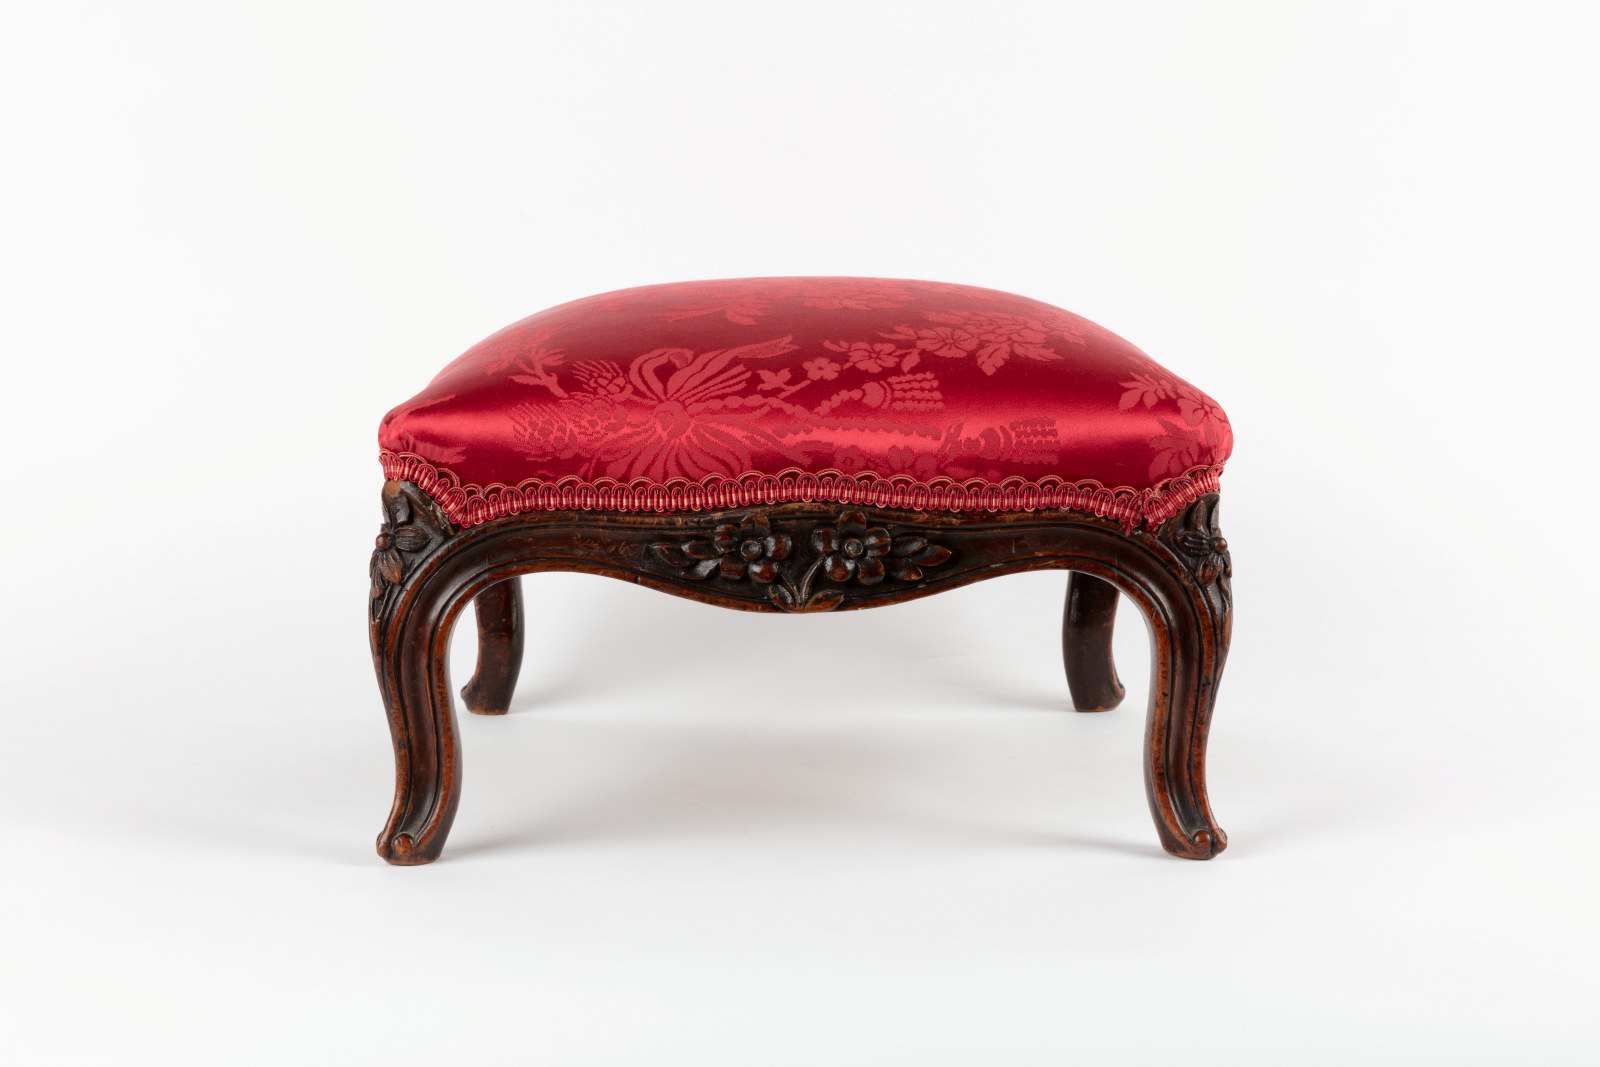 Upholstered footstool, maker unknown, England, circa 1850, rosewood and crimson silk damask